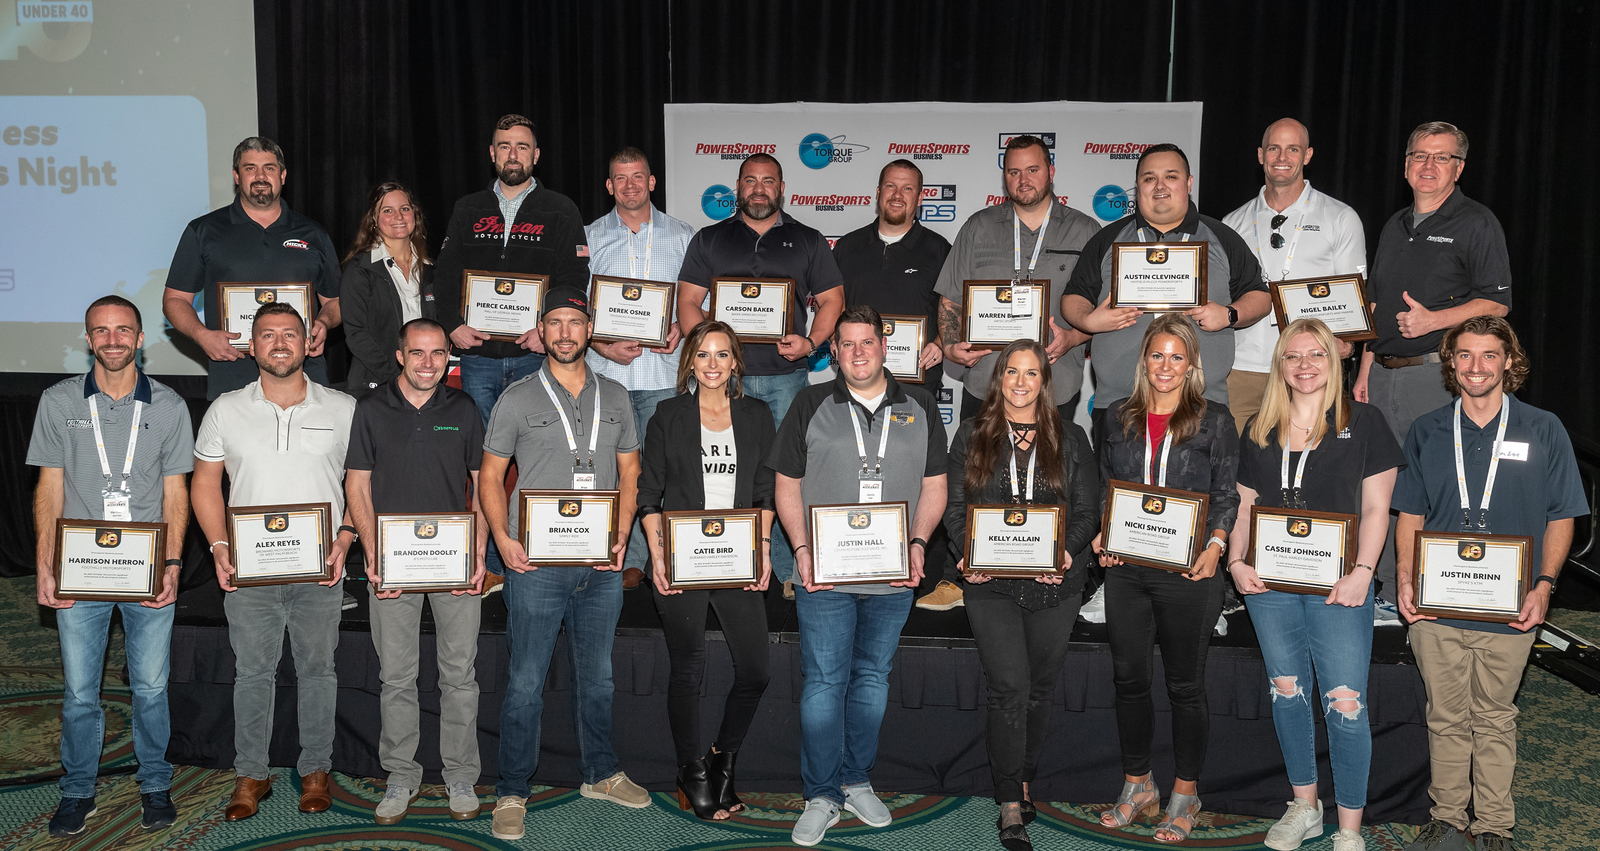 40 Under 40 – PSB recognizes the future of powersports